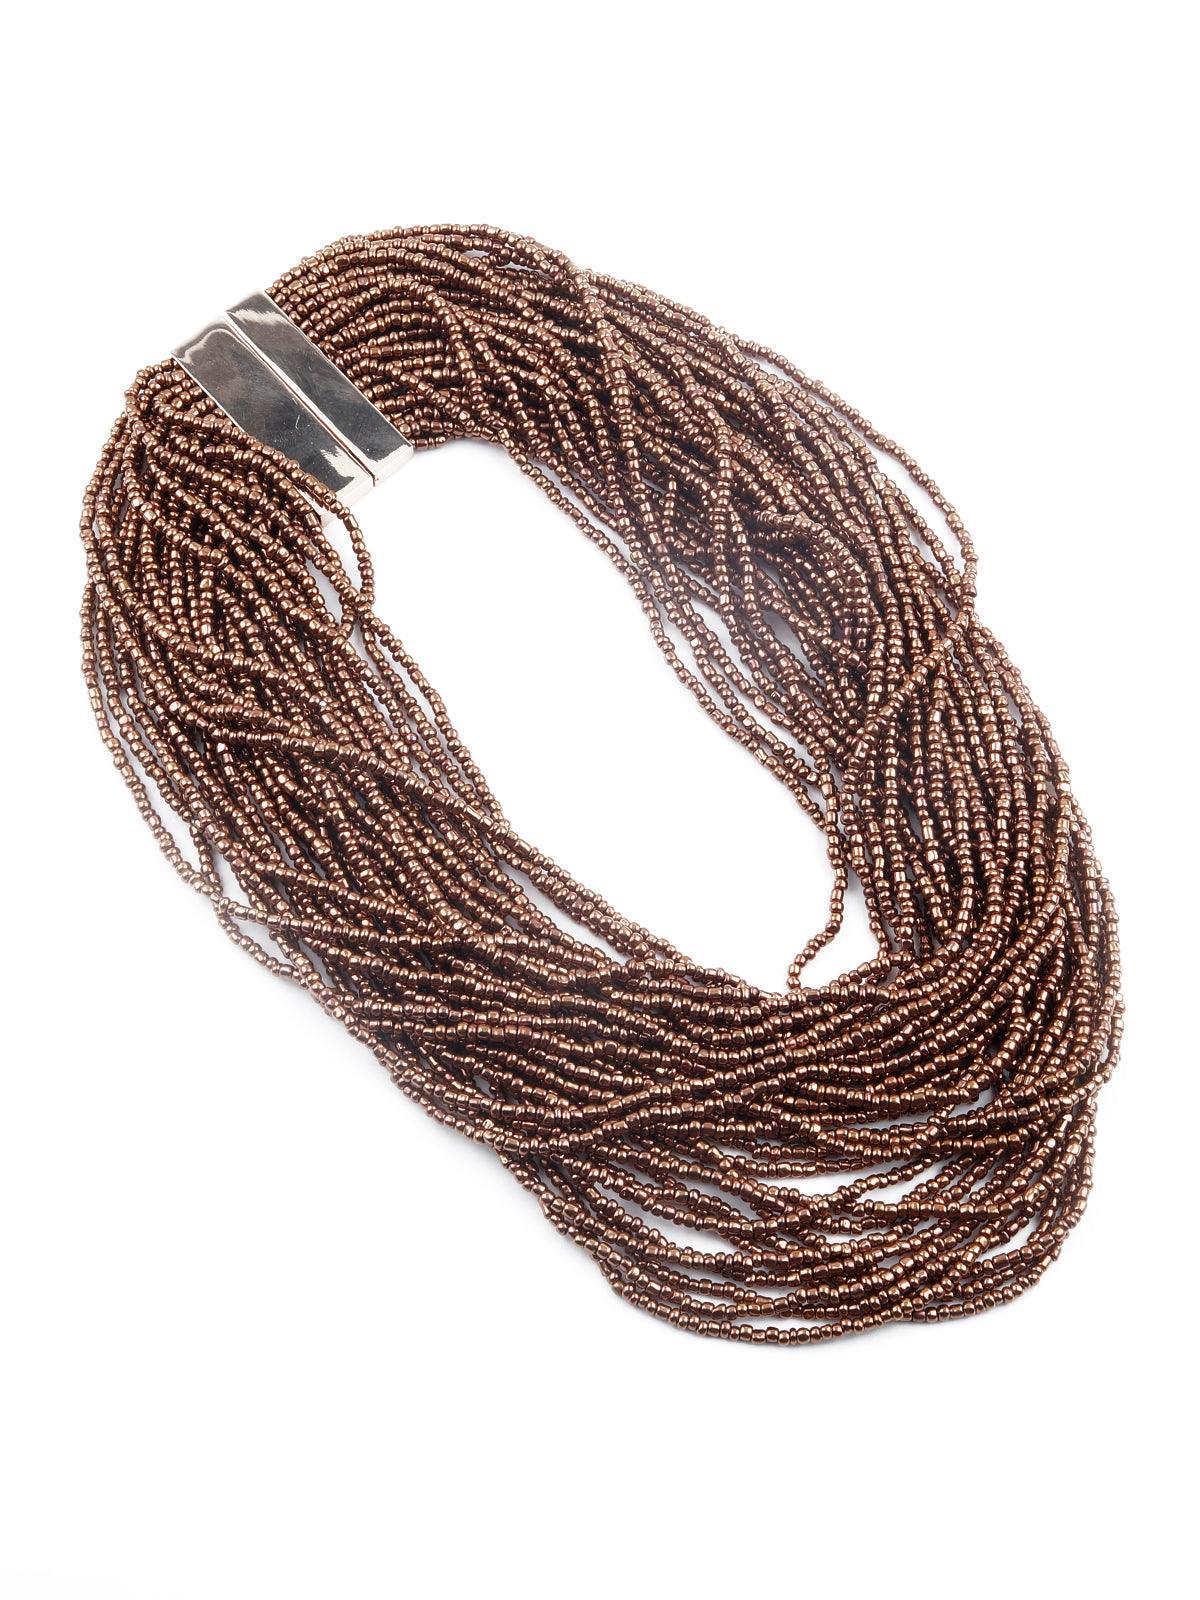 Women's Boho Brown Styled Layered Necklace For Women - Odette